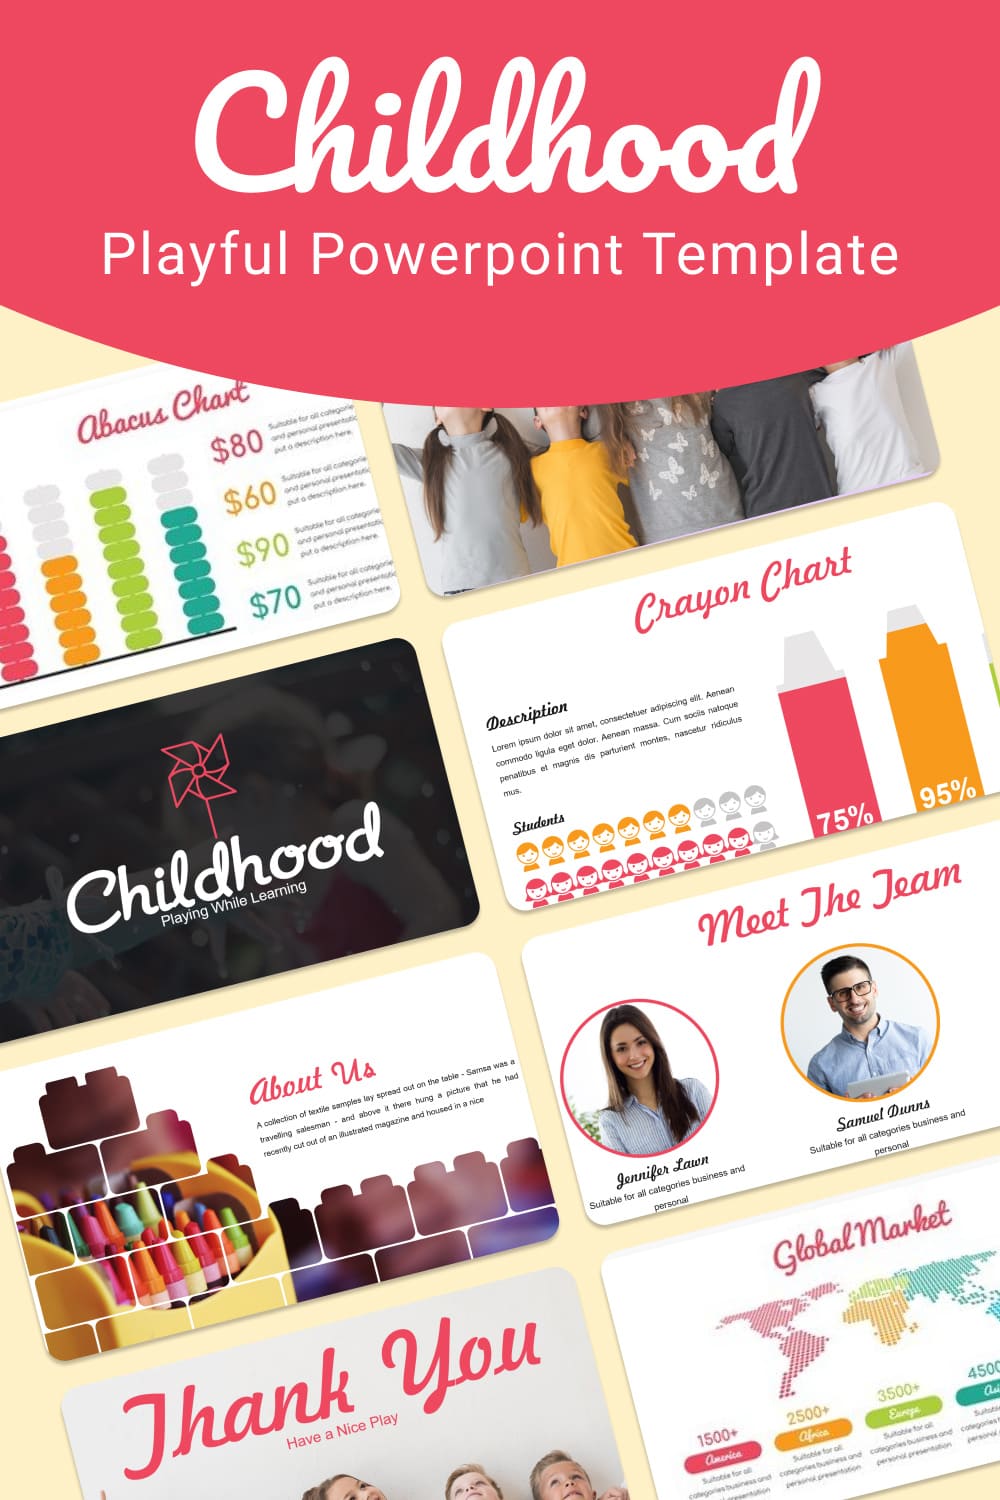 Childhood - Playful Powerpoint in different colors.